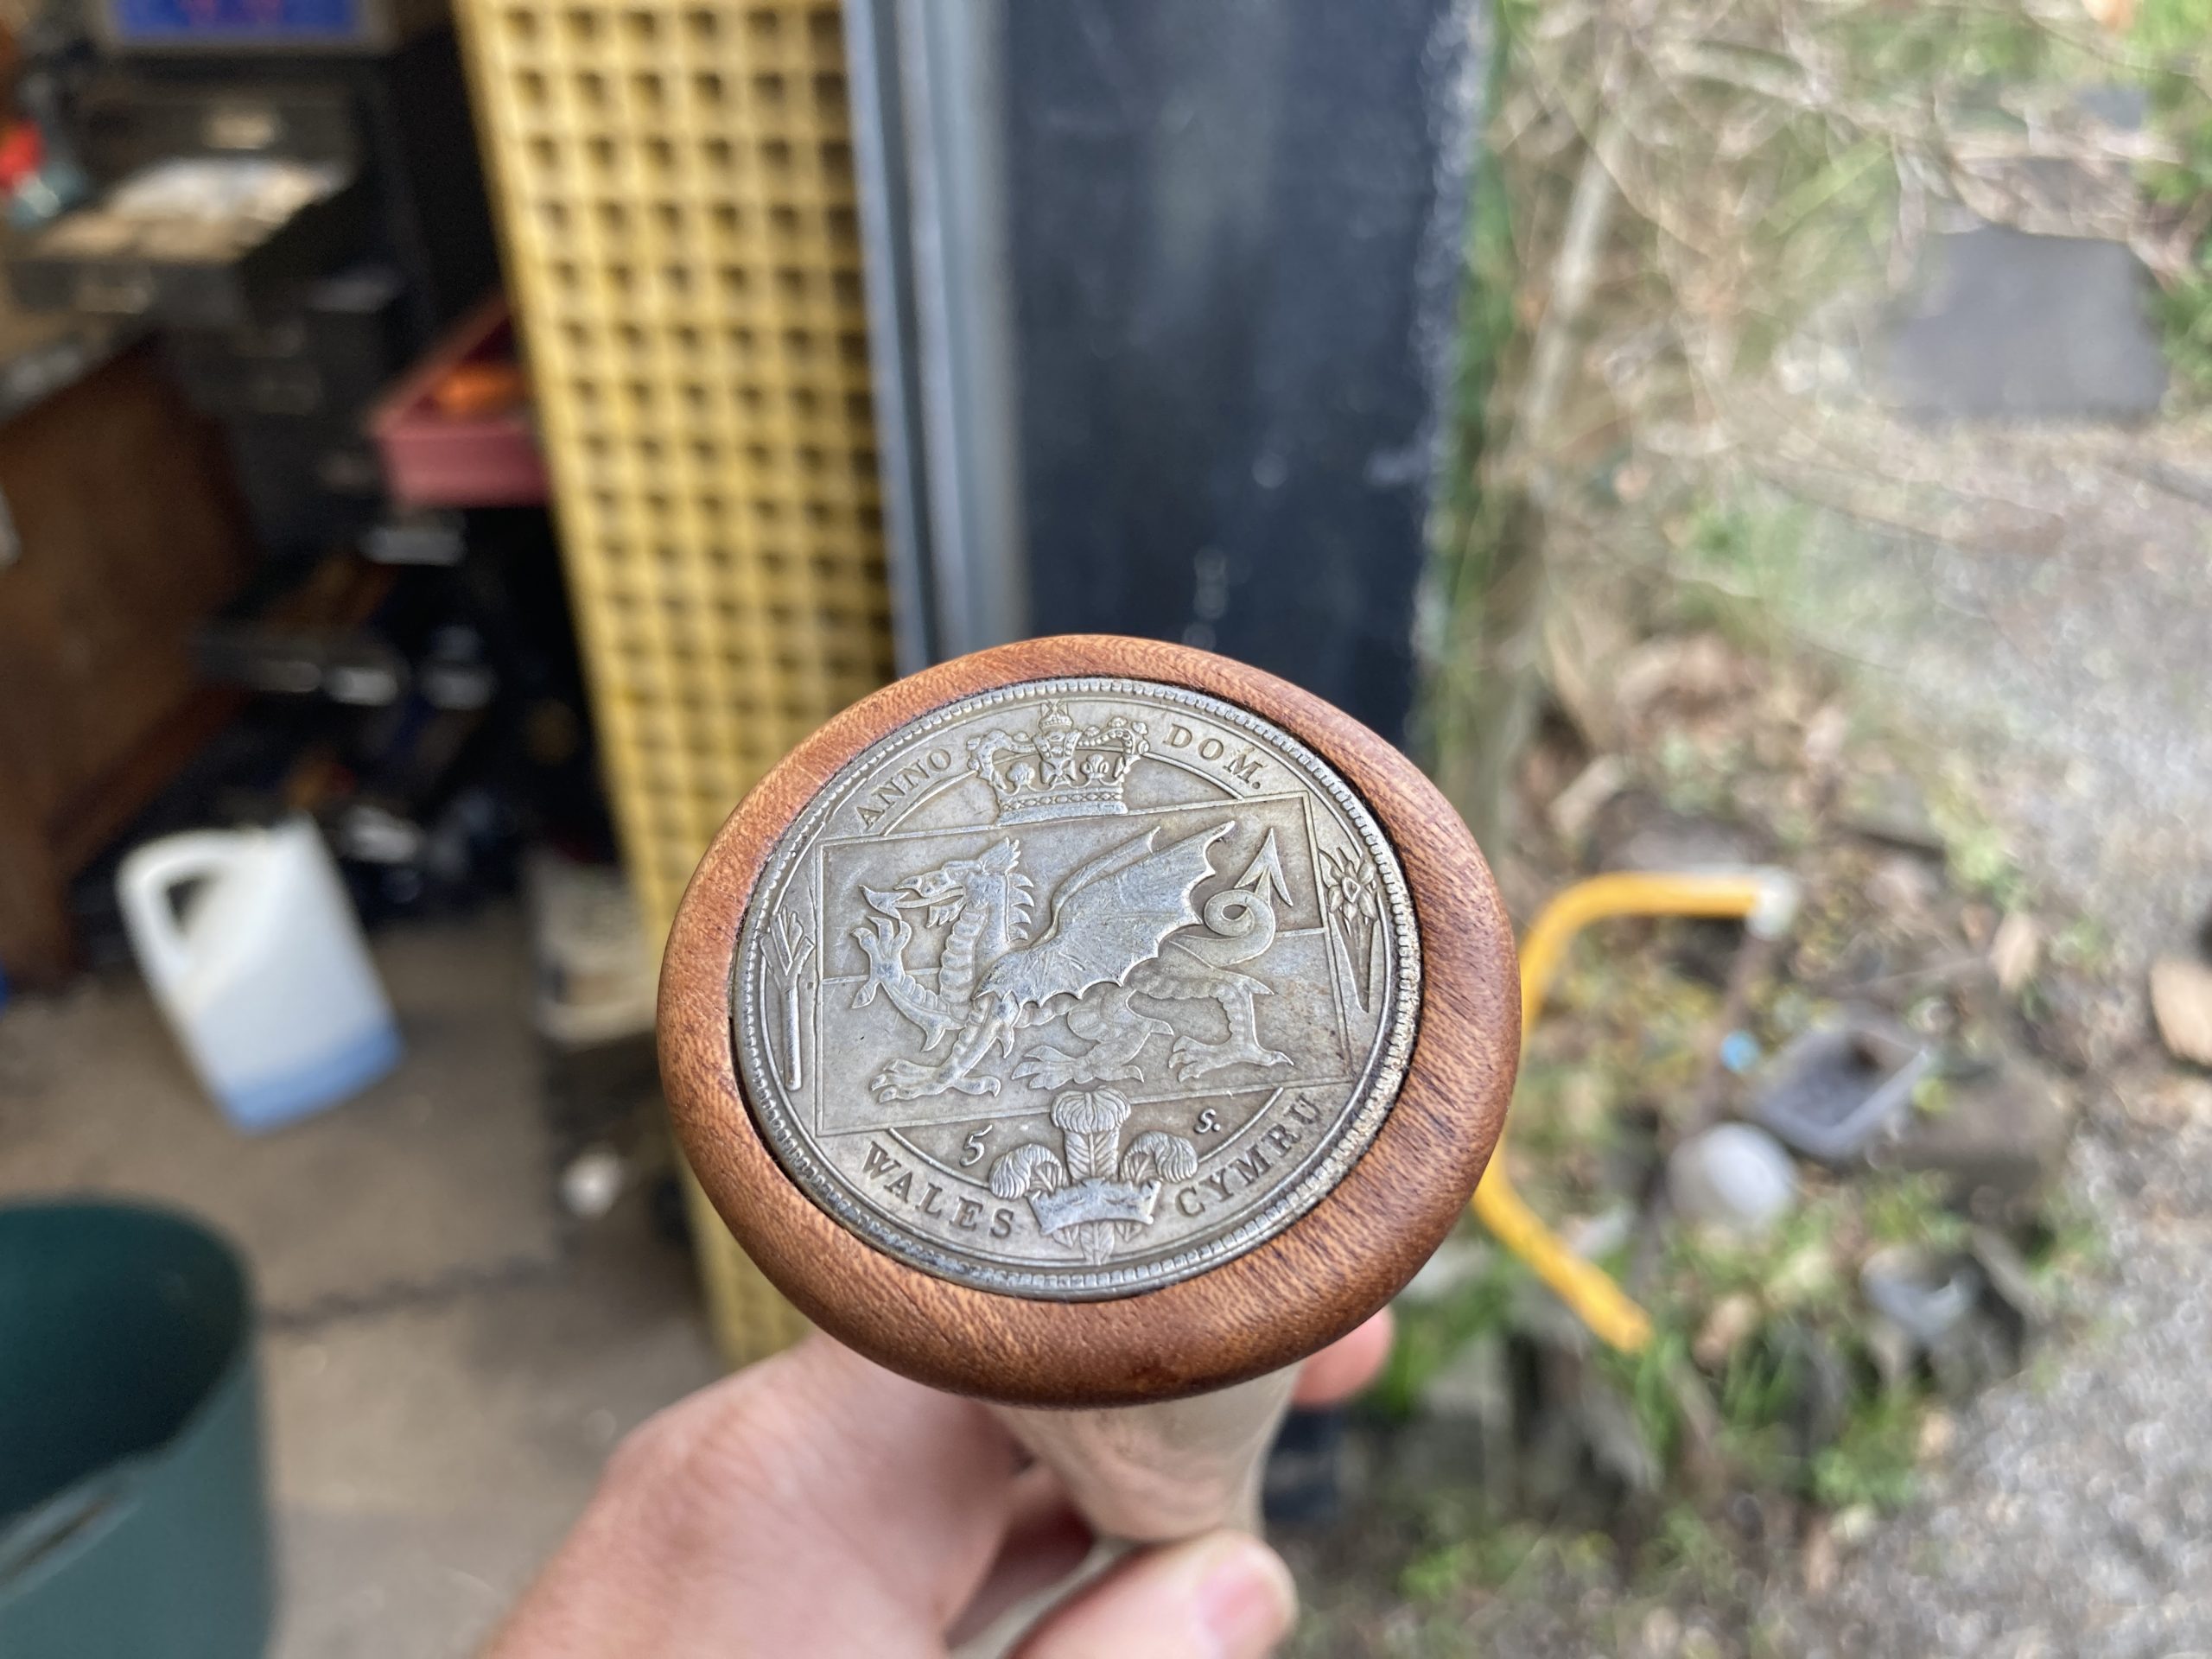 A metal coin embossed with a dragon is seen embedded into the top of the wooden staff. It sits just below centre, with the hand holding the staff visible. The background is blurred with use of aperture but you see the garage wall in the centre with garage on the left and gravel to the right.